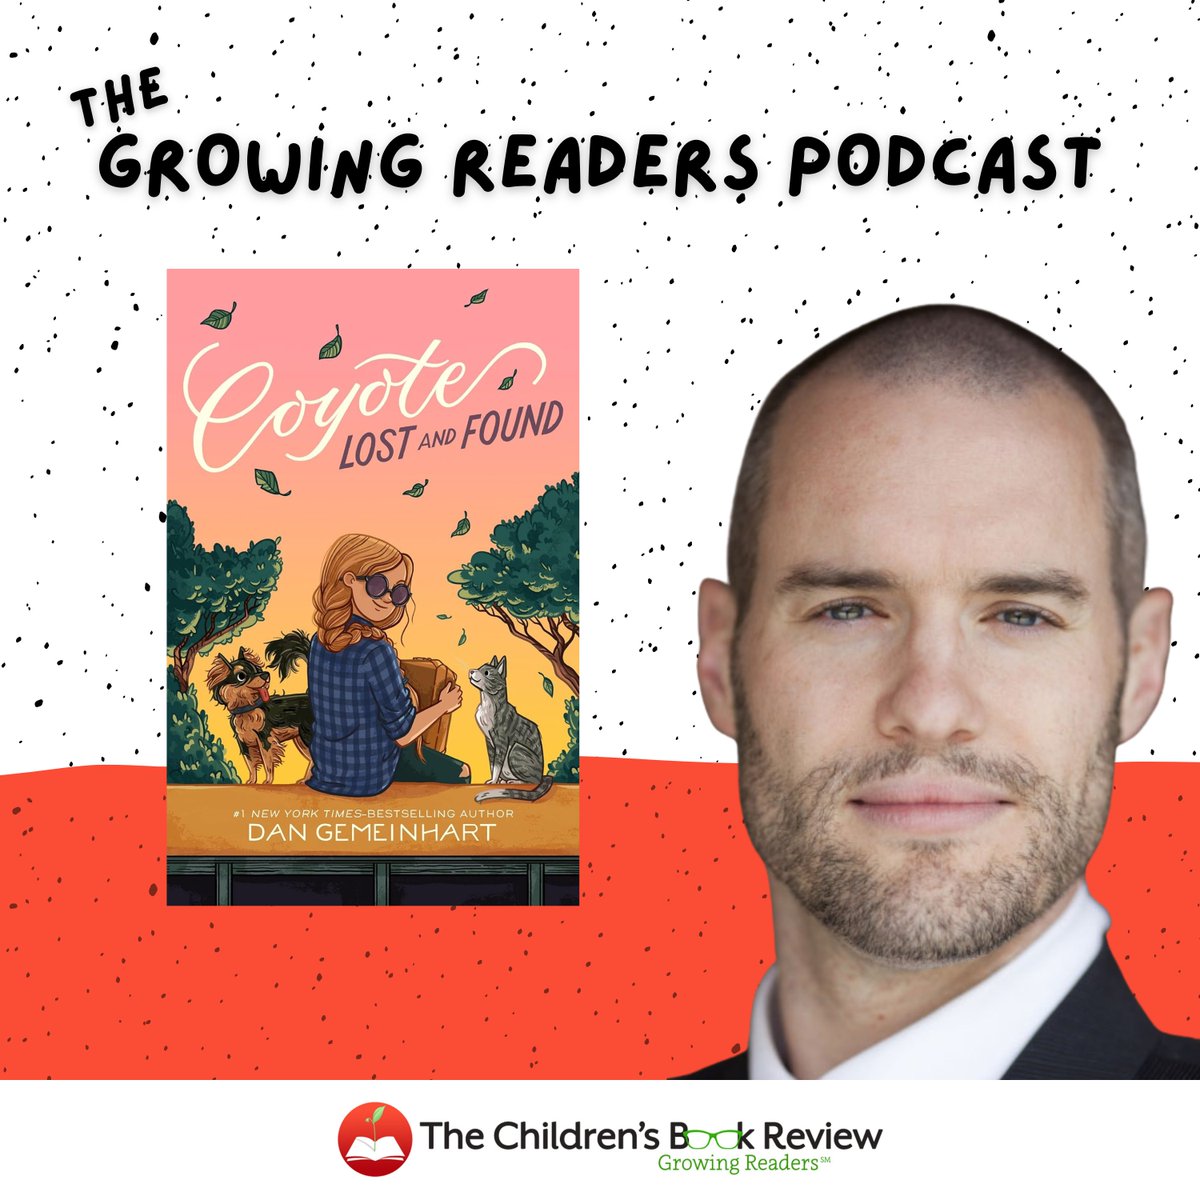 In this insightful interview, acclaimed middle-grade author @DanGemeinhart discusses his highly anticipated standalone companion novel Coyote Lost and Found, the follow-up to his beloved bestseller The Remarkable Journey of Coyote Sunrise: podcasters.spotify.com/pod/show/thech…